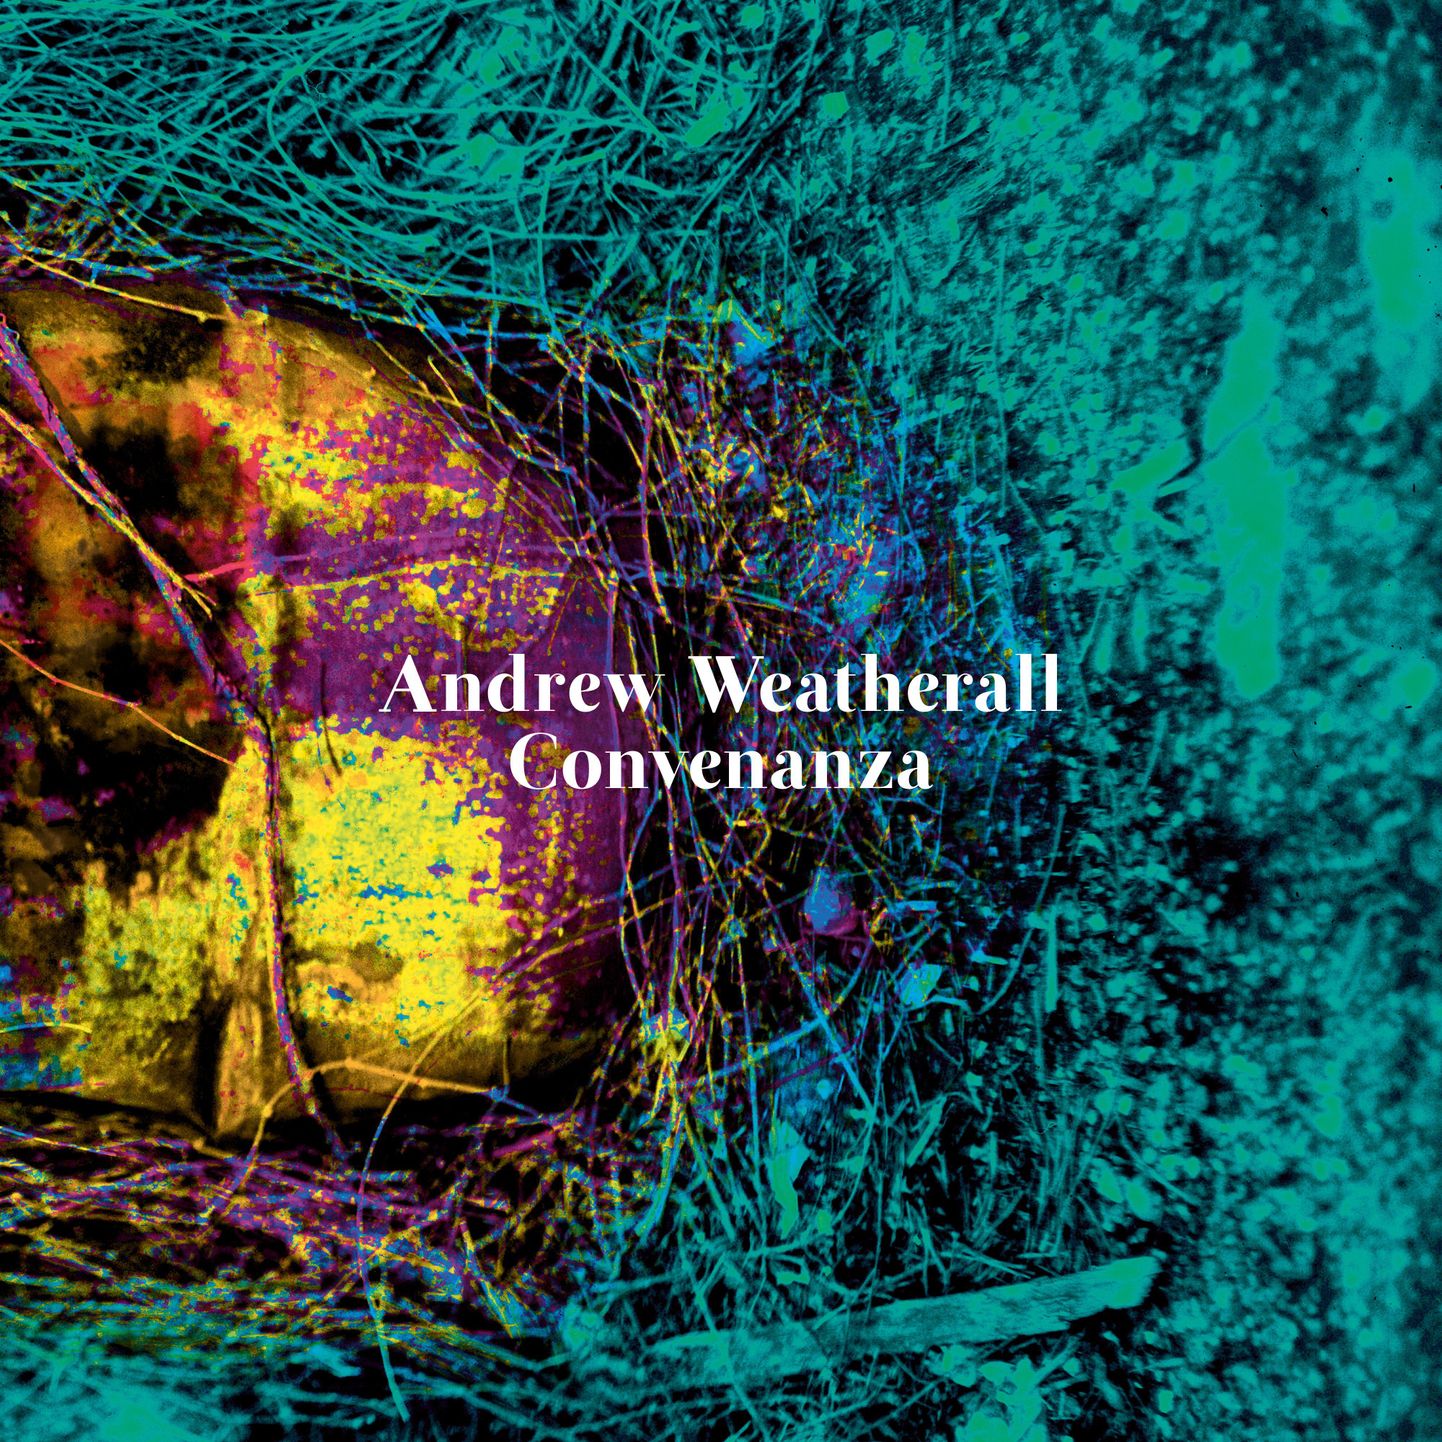 Andrew Weatherall- Convenanza